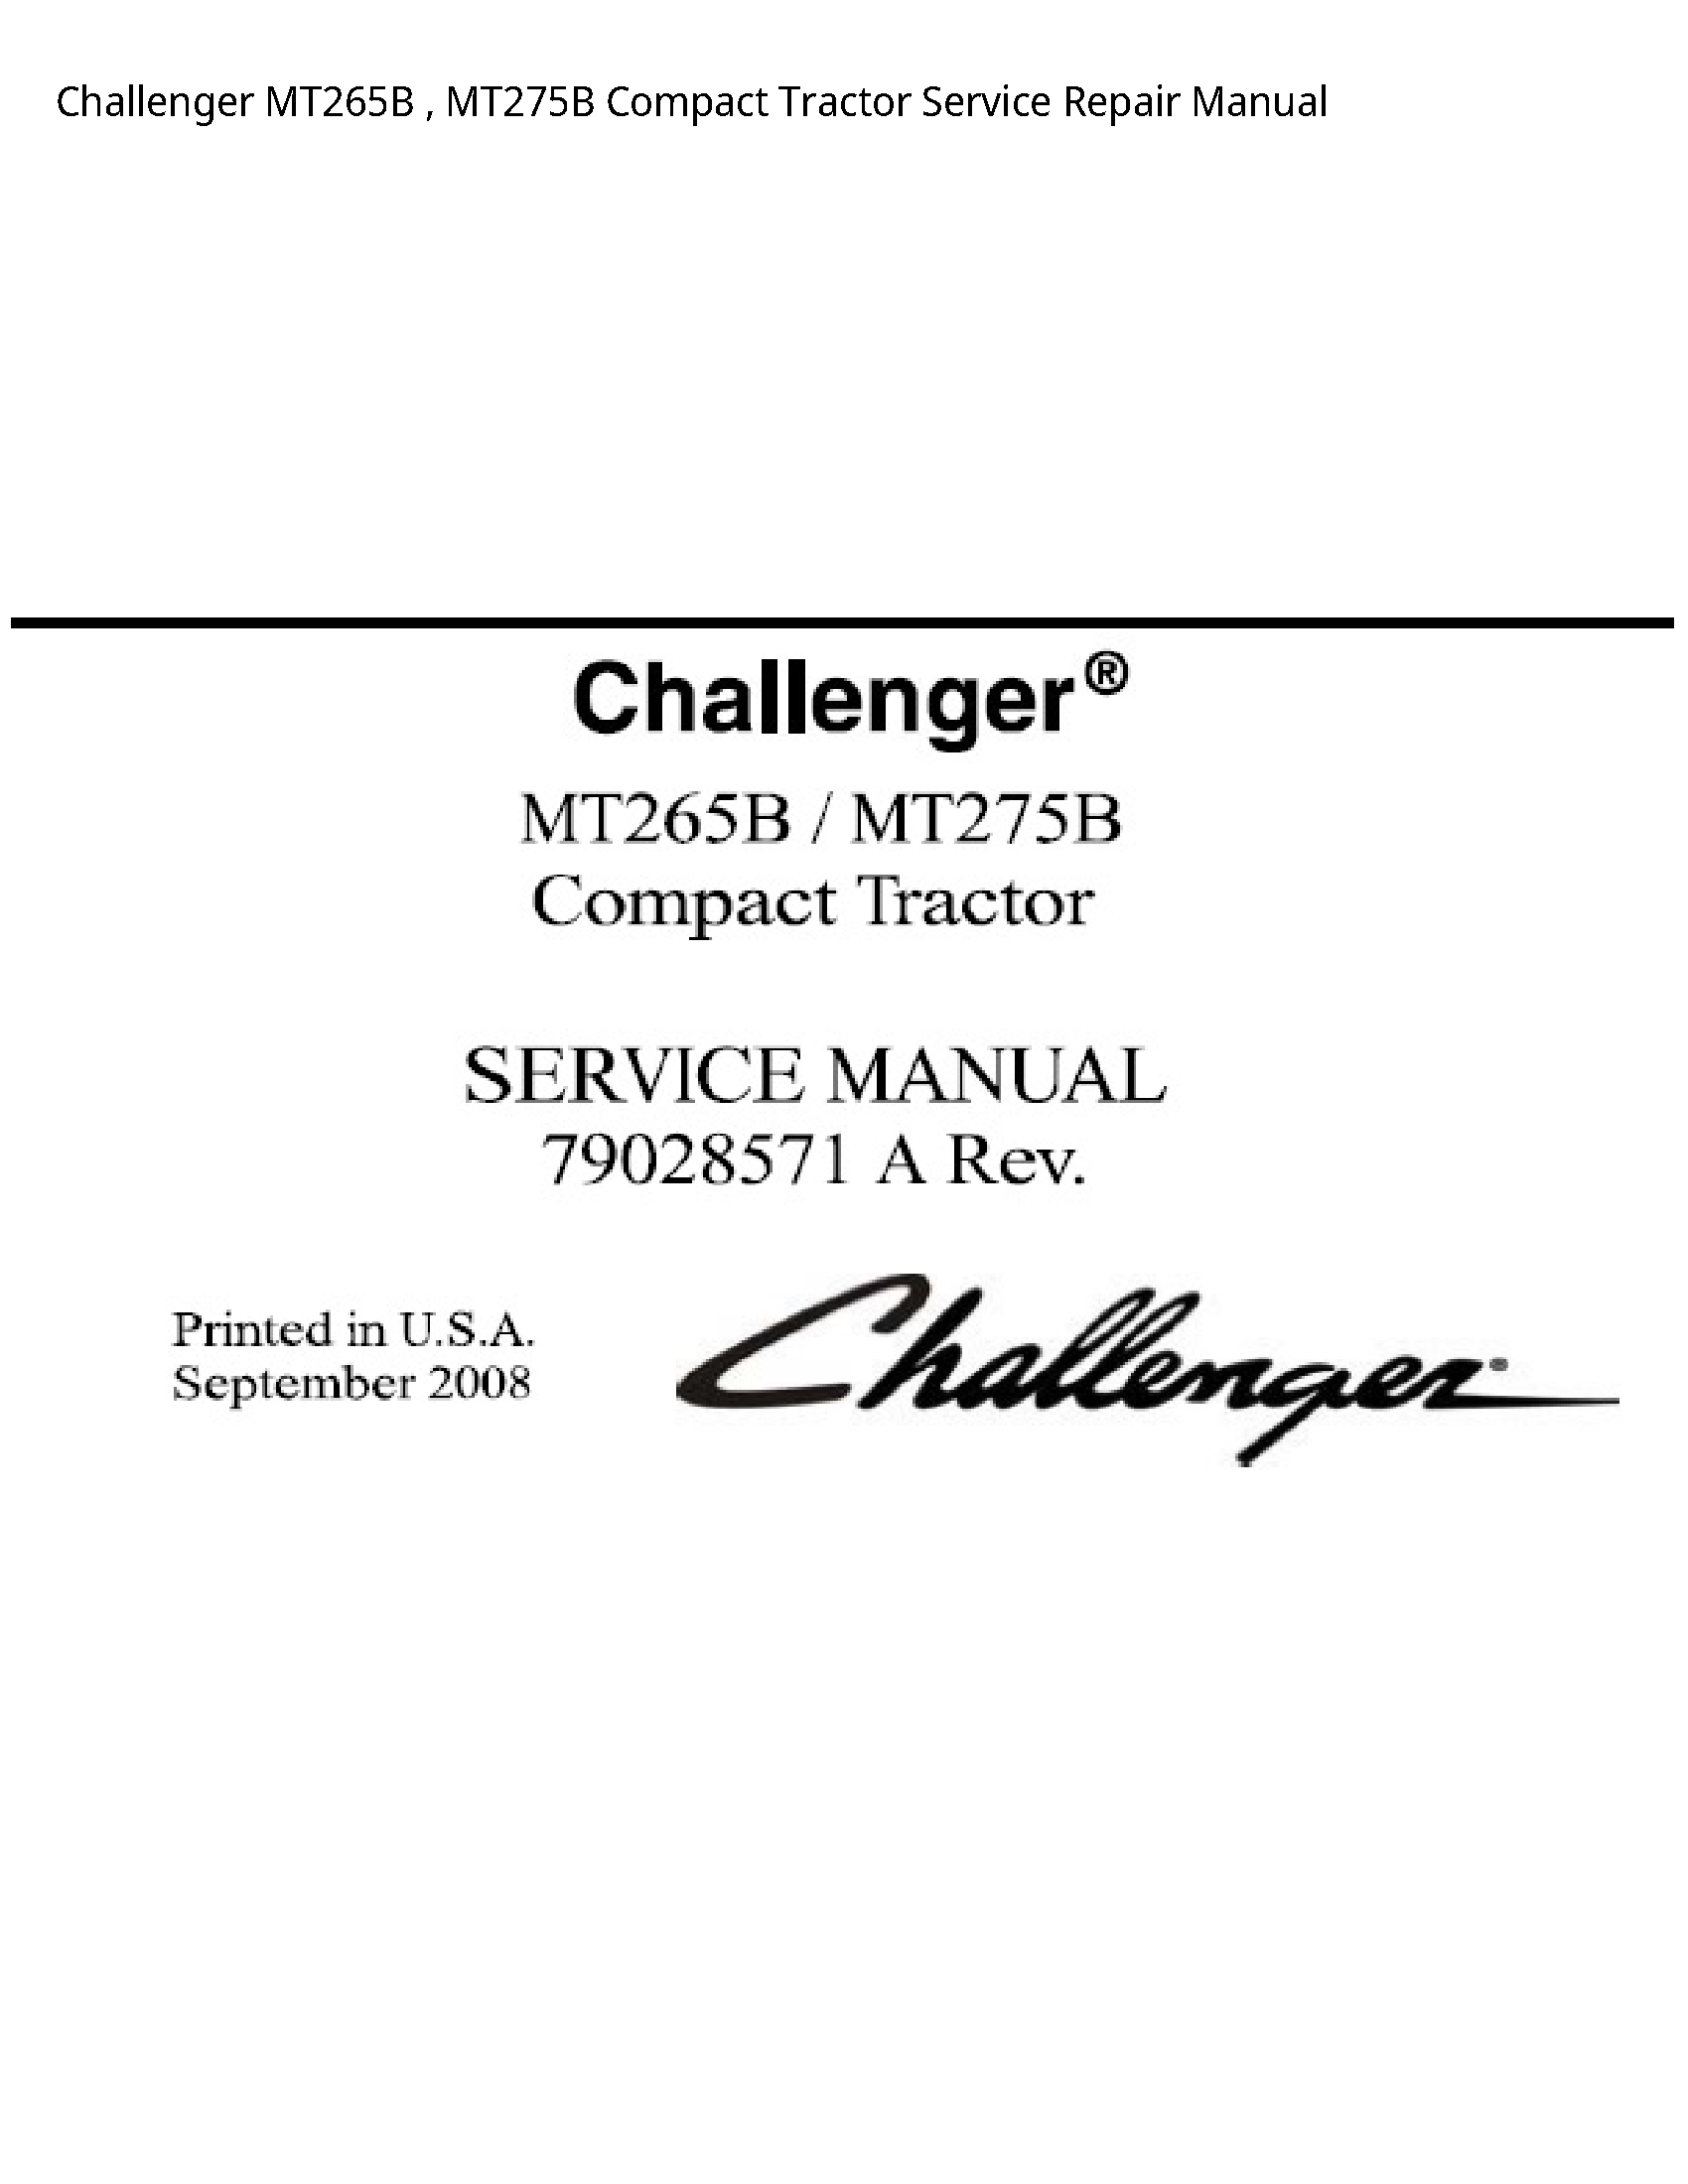 Challenger MT265B Compact Tractor manual